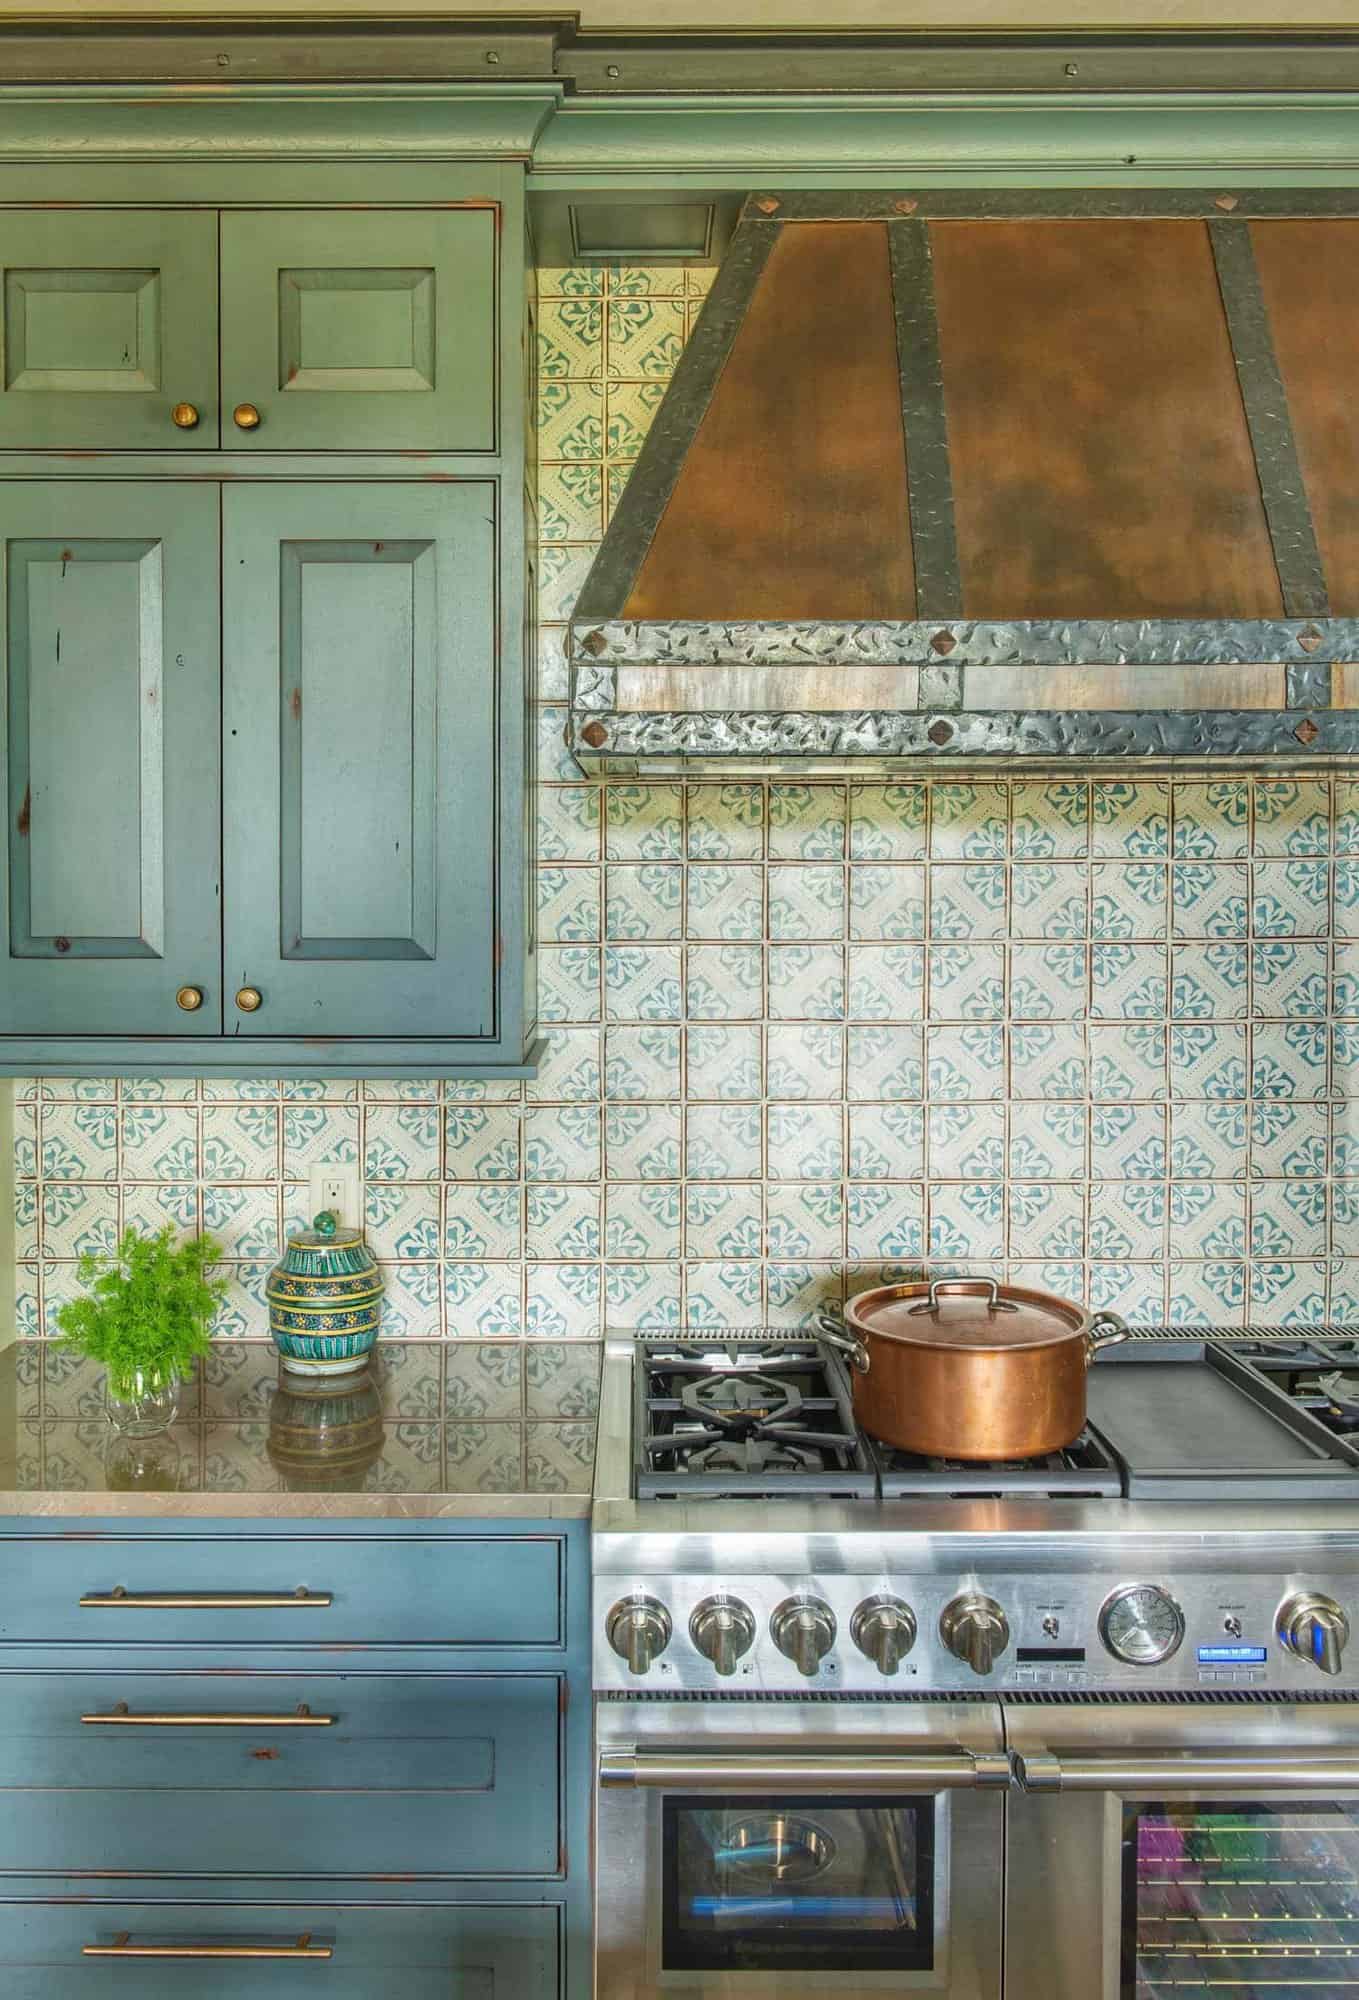 rustic kitchen range wall with a handcrafted tile backsplash